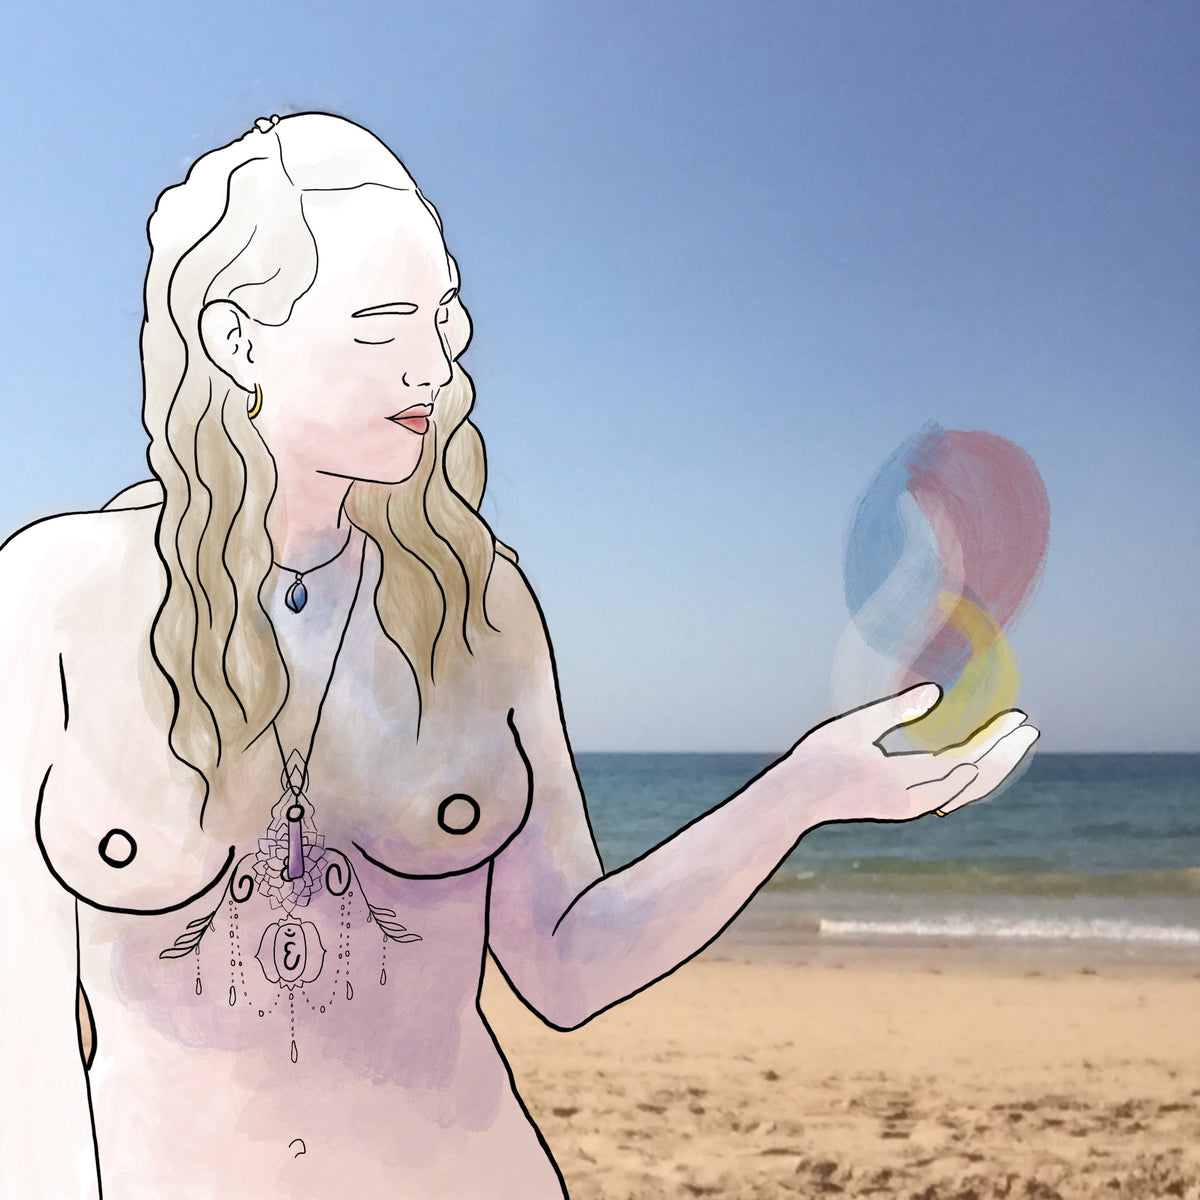 Naked woman at the beach. Woman’s body drawing in photo of beach. Magic and spiritual woman holding tree flame. Color energy expanding inside naked woman. Art therapy